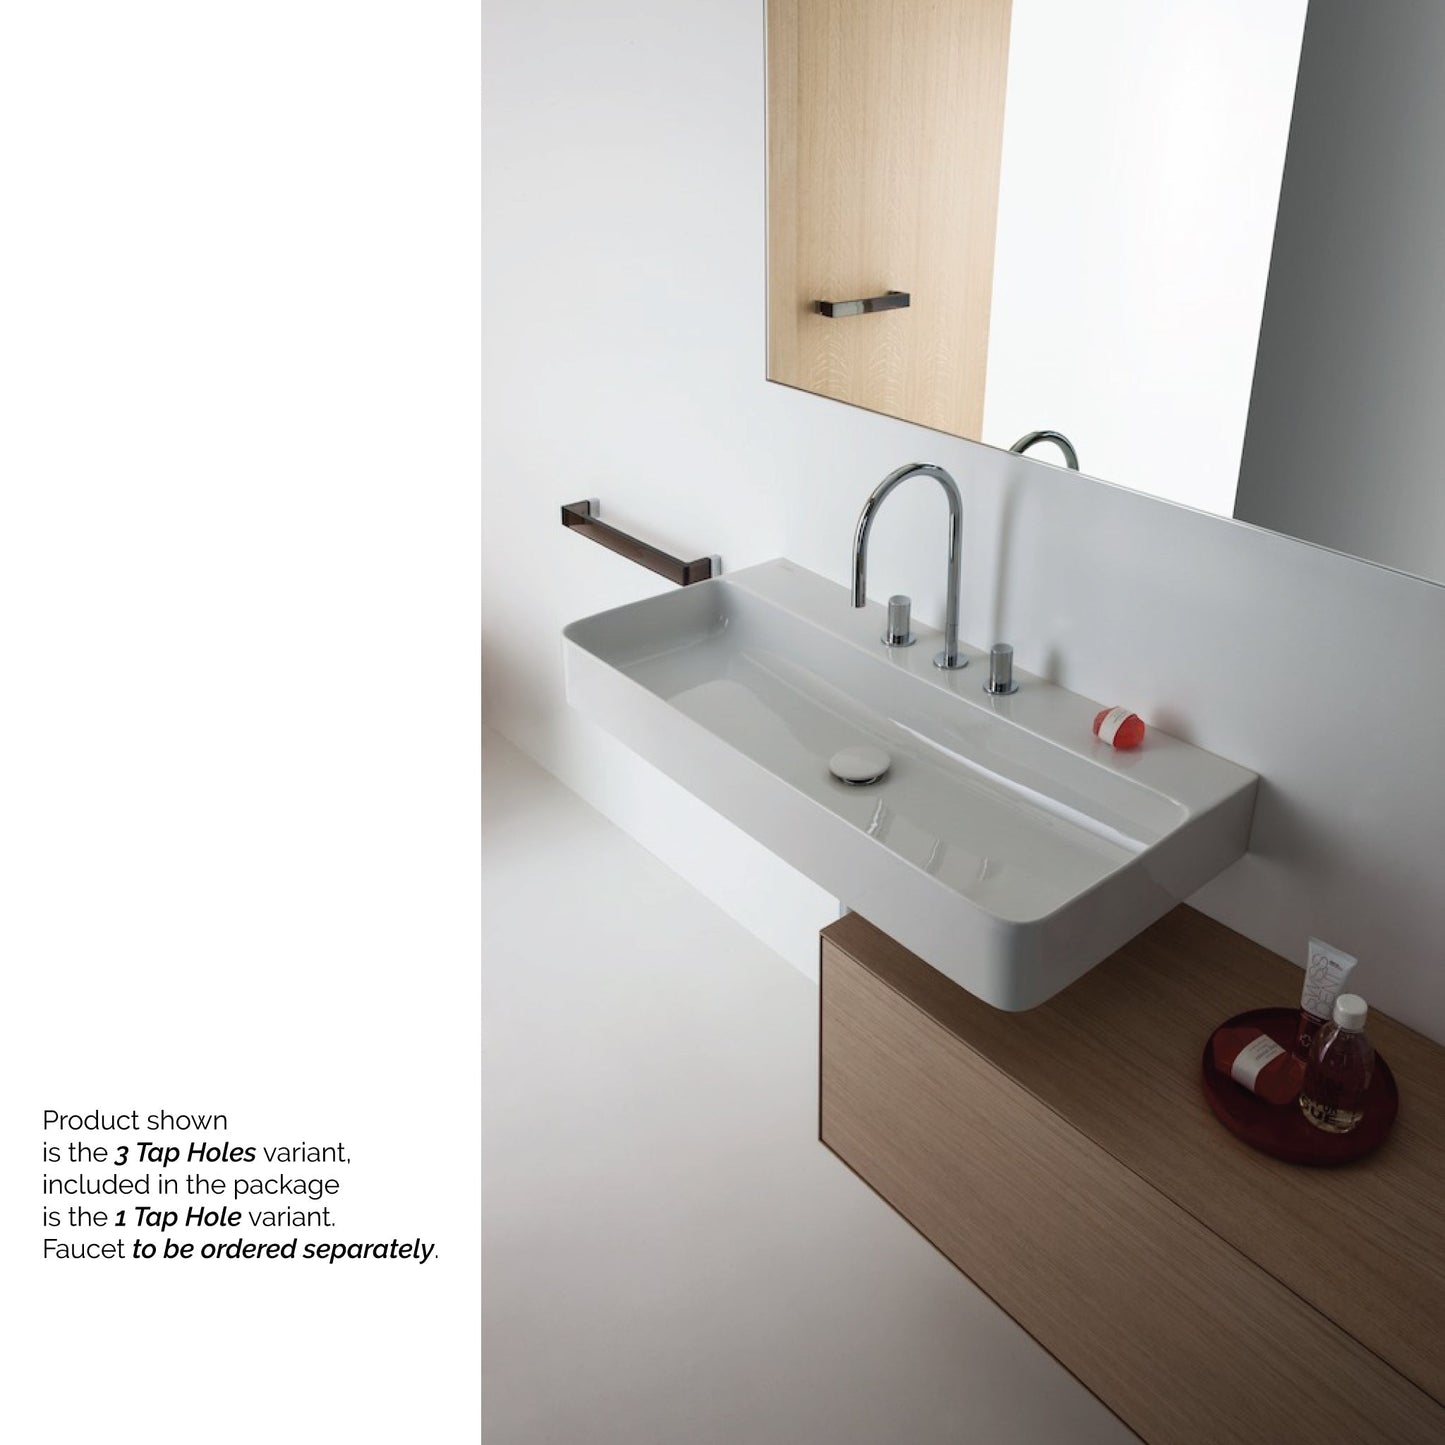 Laufen Val 30" x 17" Matte White Ceramic Wall-Mounted Bathroom Sink With Faucet Hole